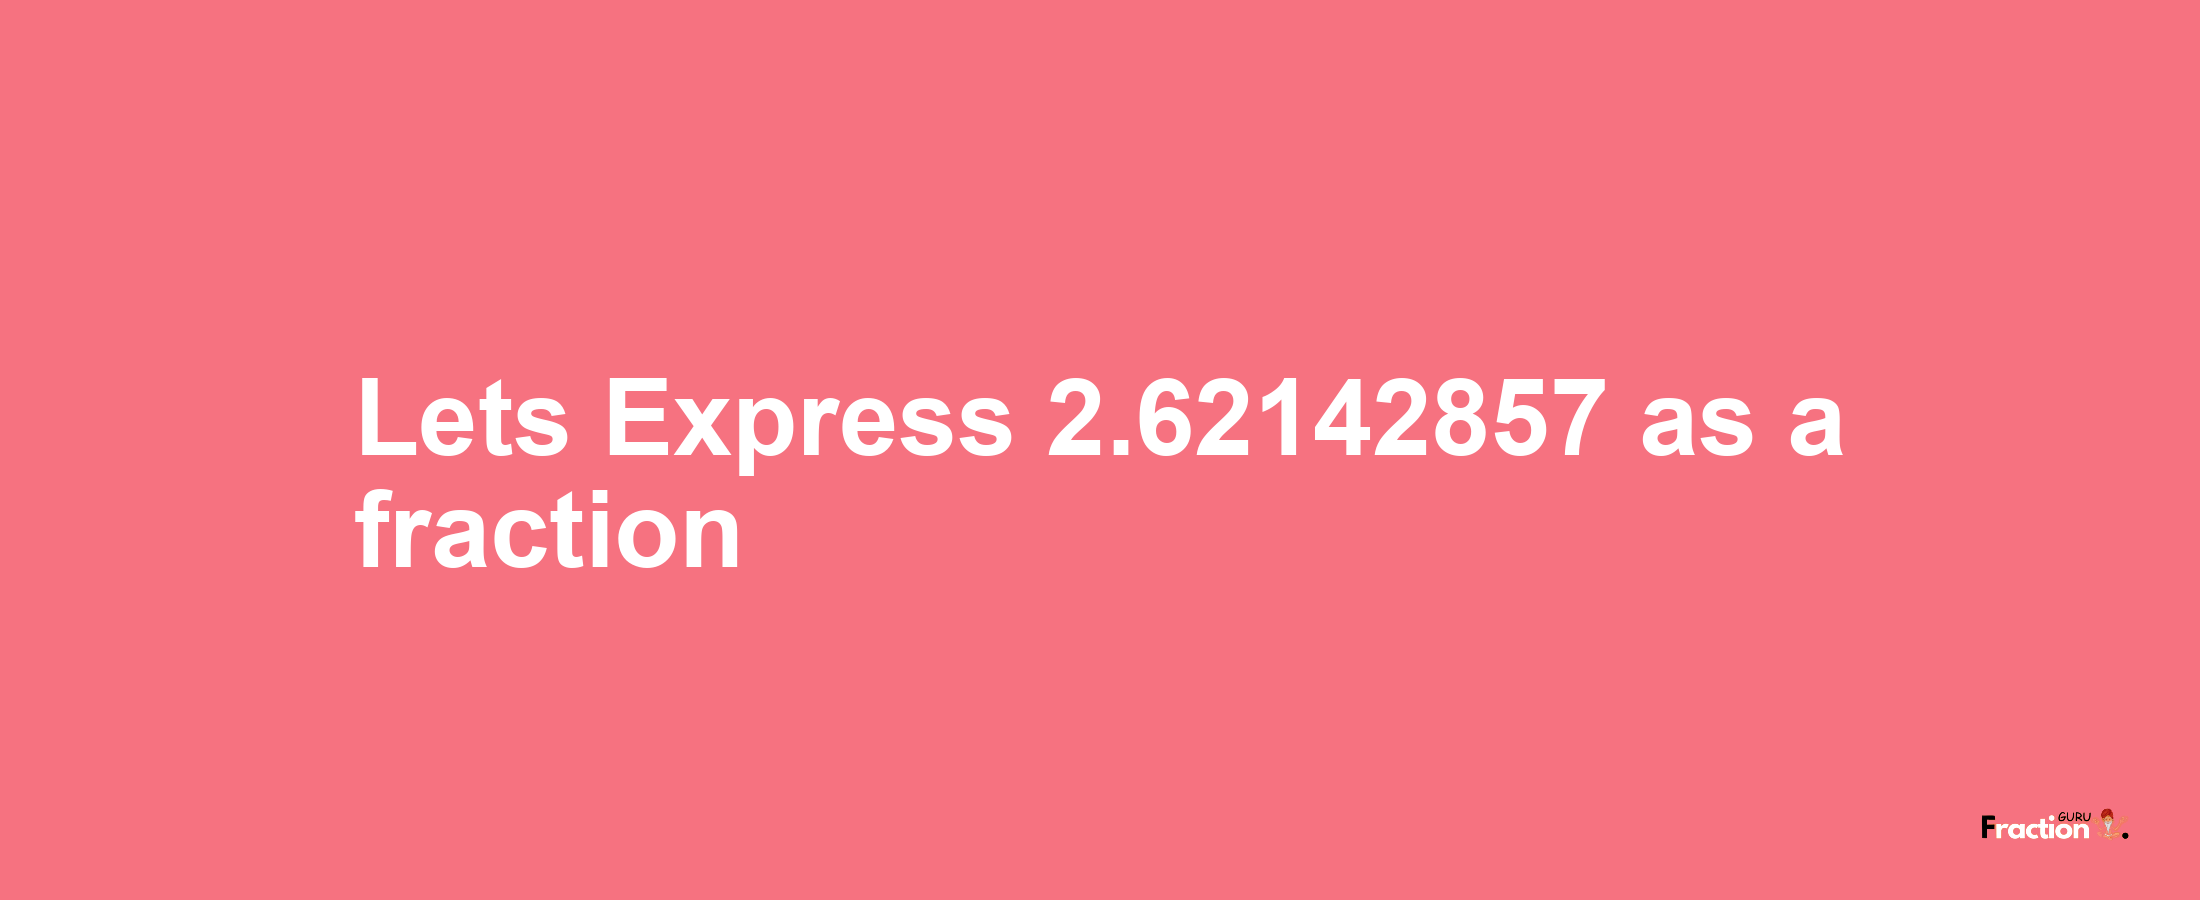 Lets Express 2.62142857 as afraction